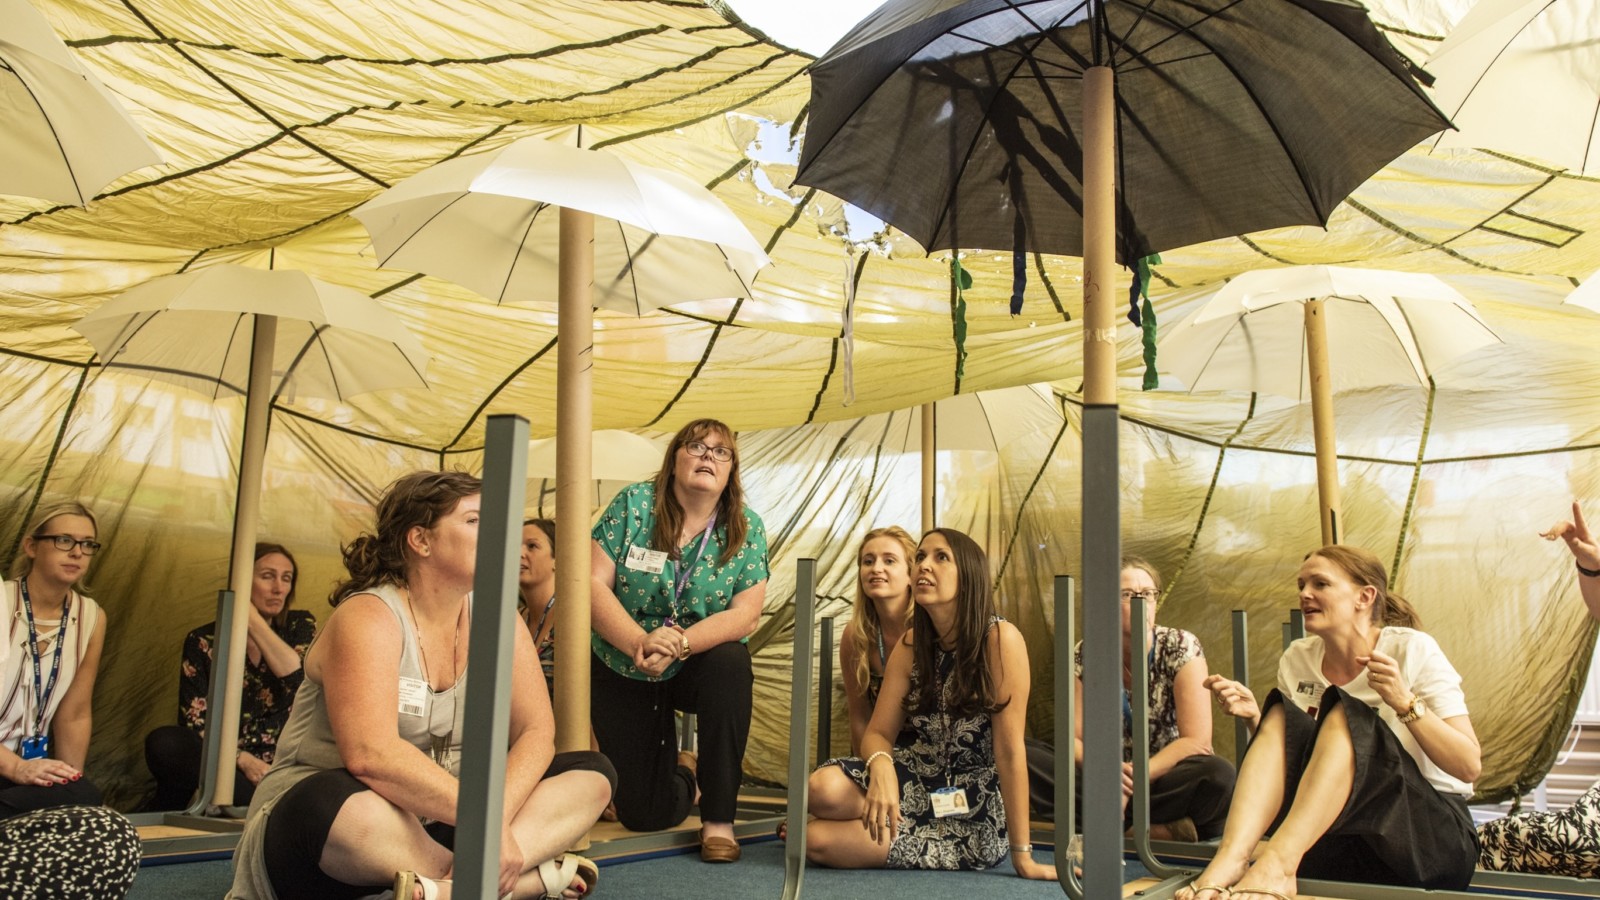 5 women sit in a bell tent with umbrellas hanging from the ceiling. The women are listening to another woman who is talking to the group. There is an upturned table in front of the woman speaking, who has dark hair and is wearing a cream coloured top.|